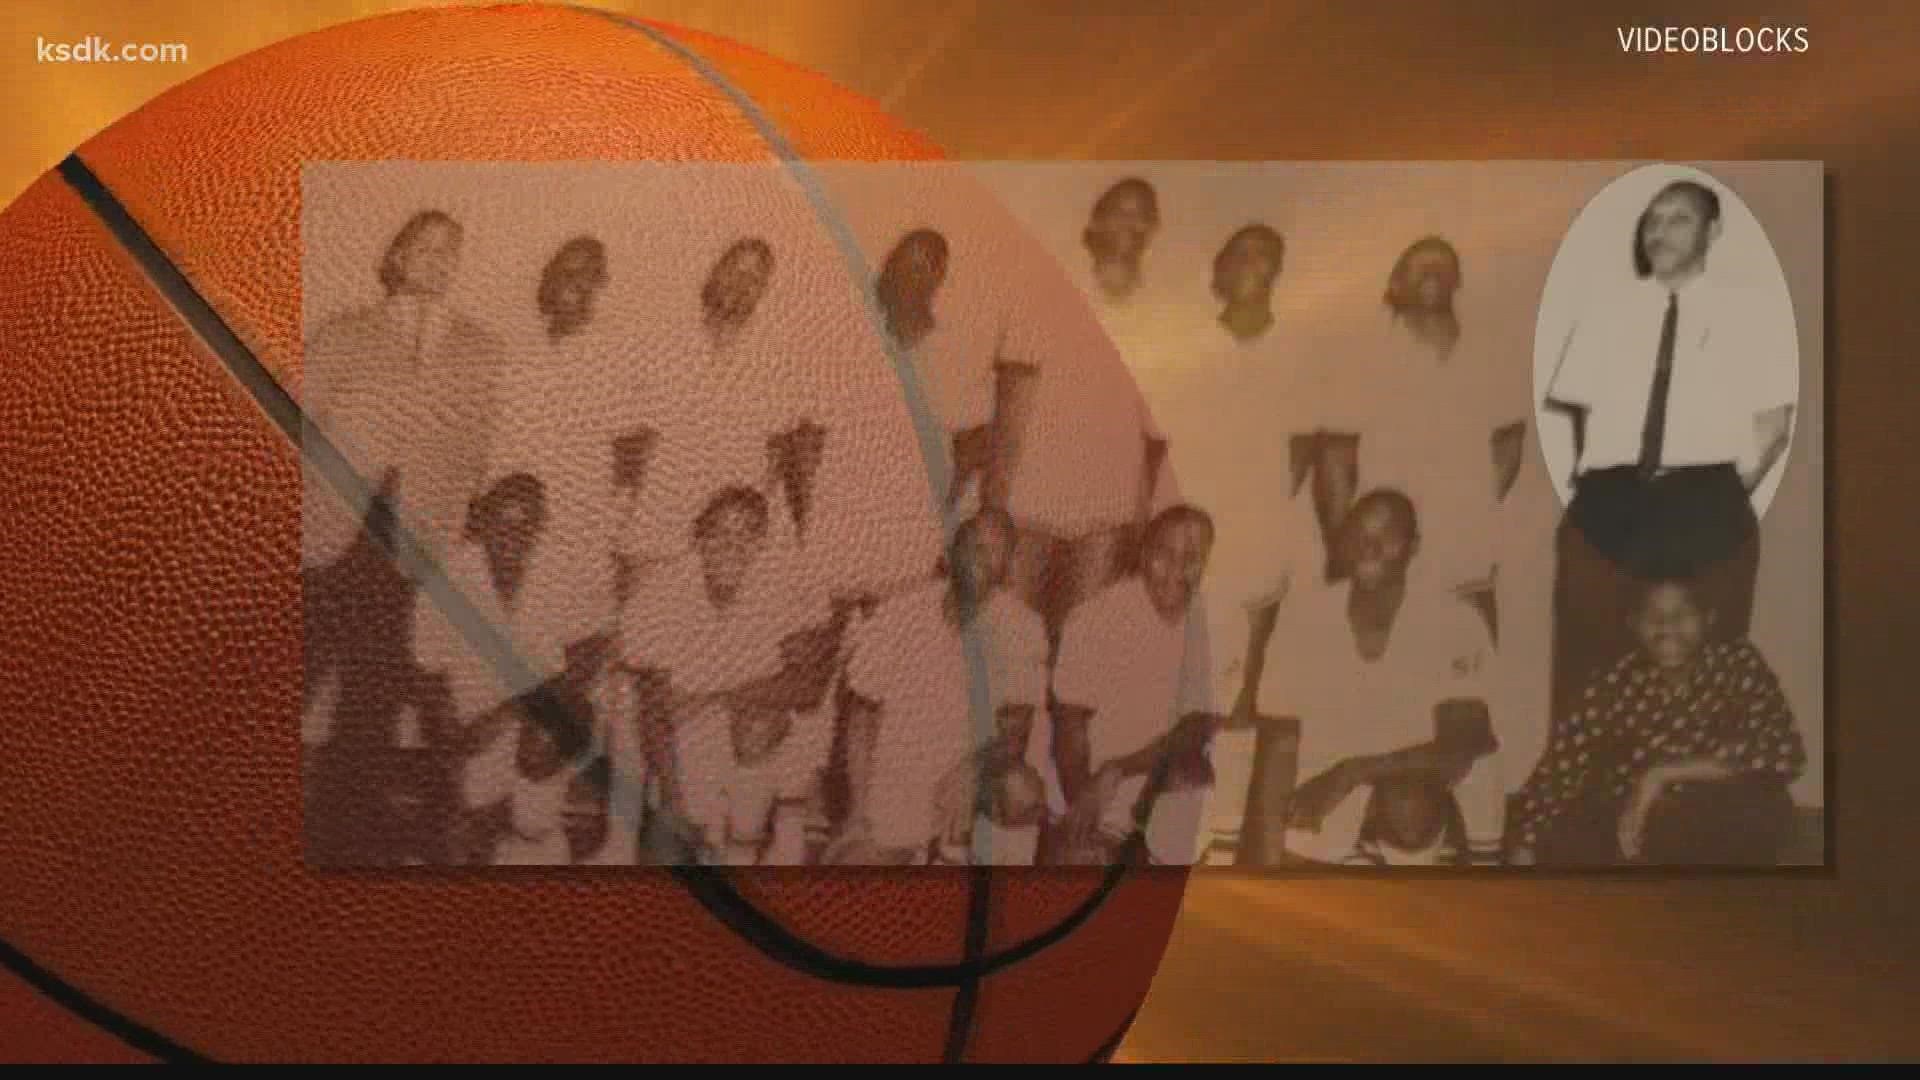 In 1962, he became the first Black coach to lead a team to the Final Four in Missouri. George Cross is now 99 years old.